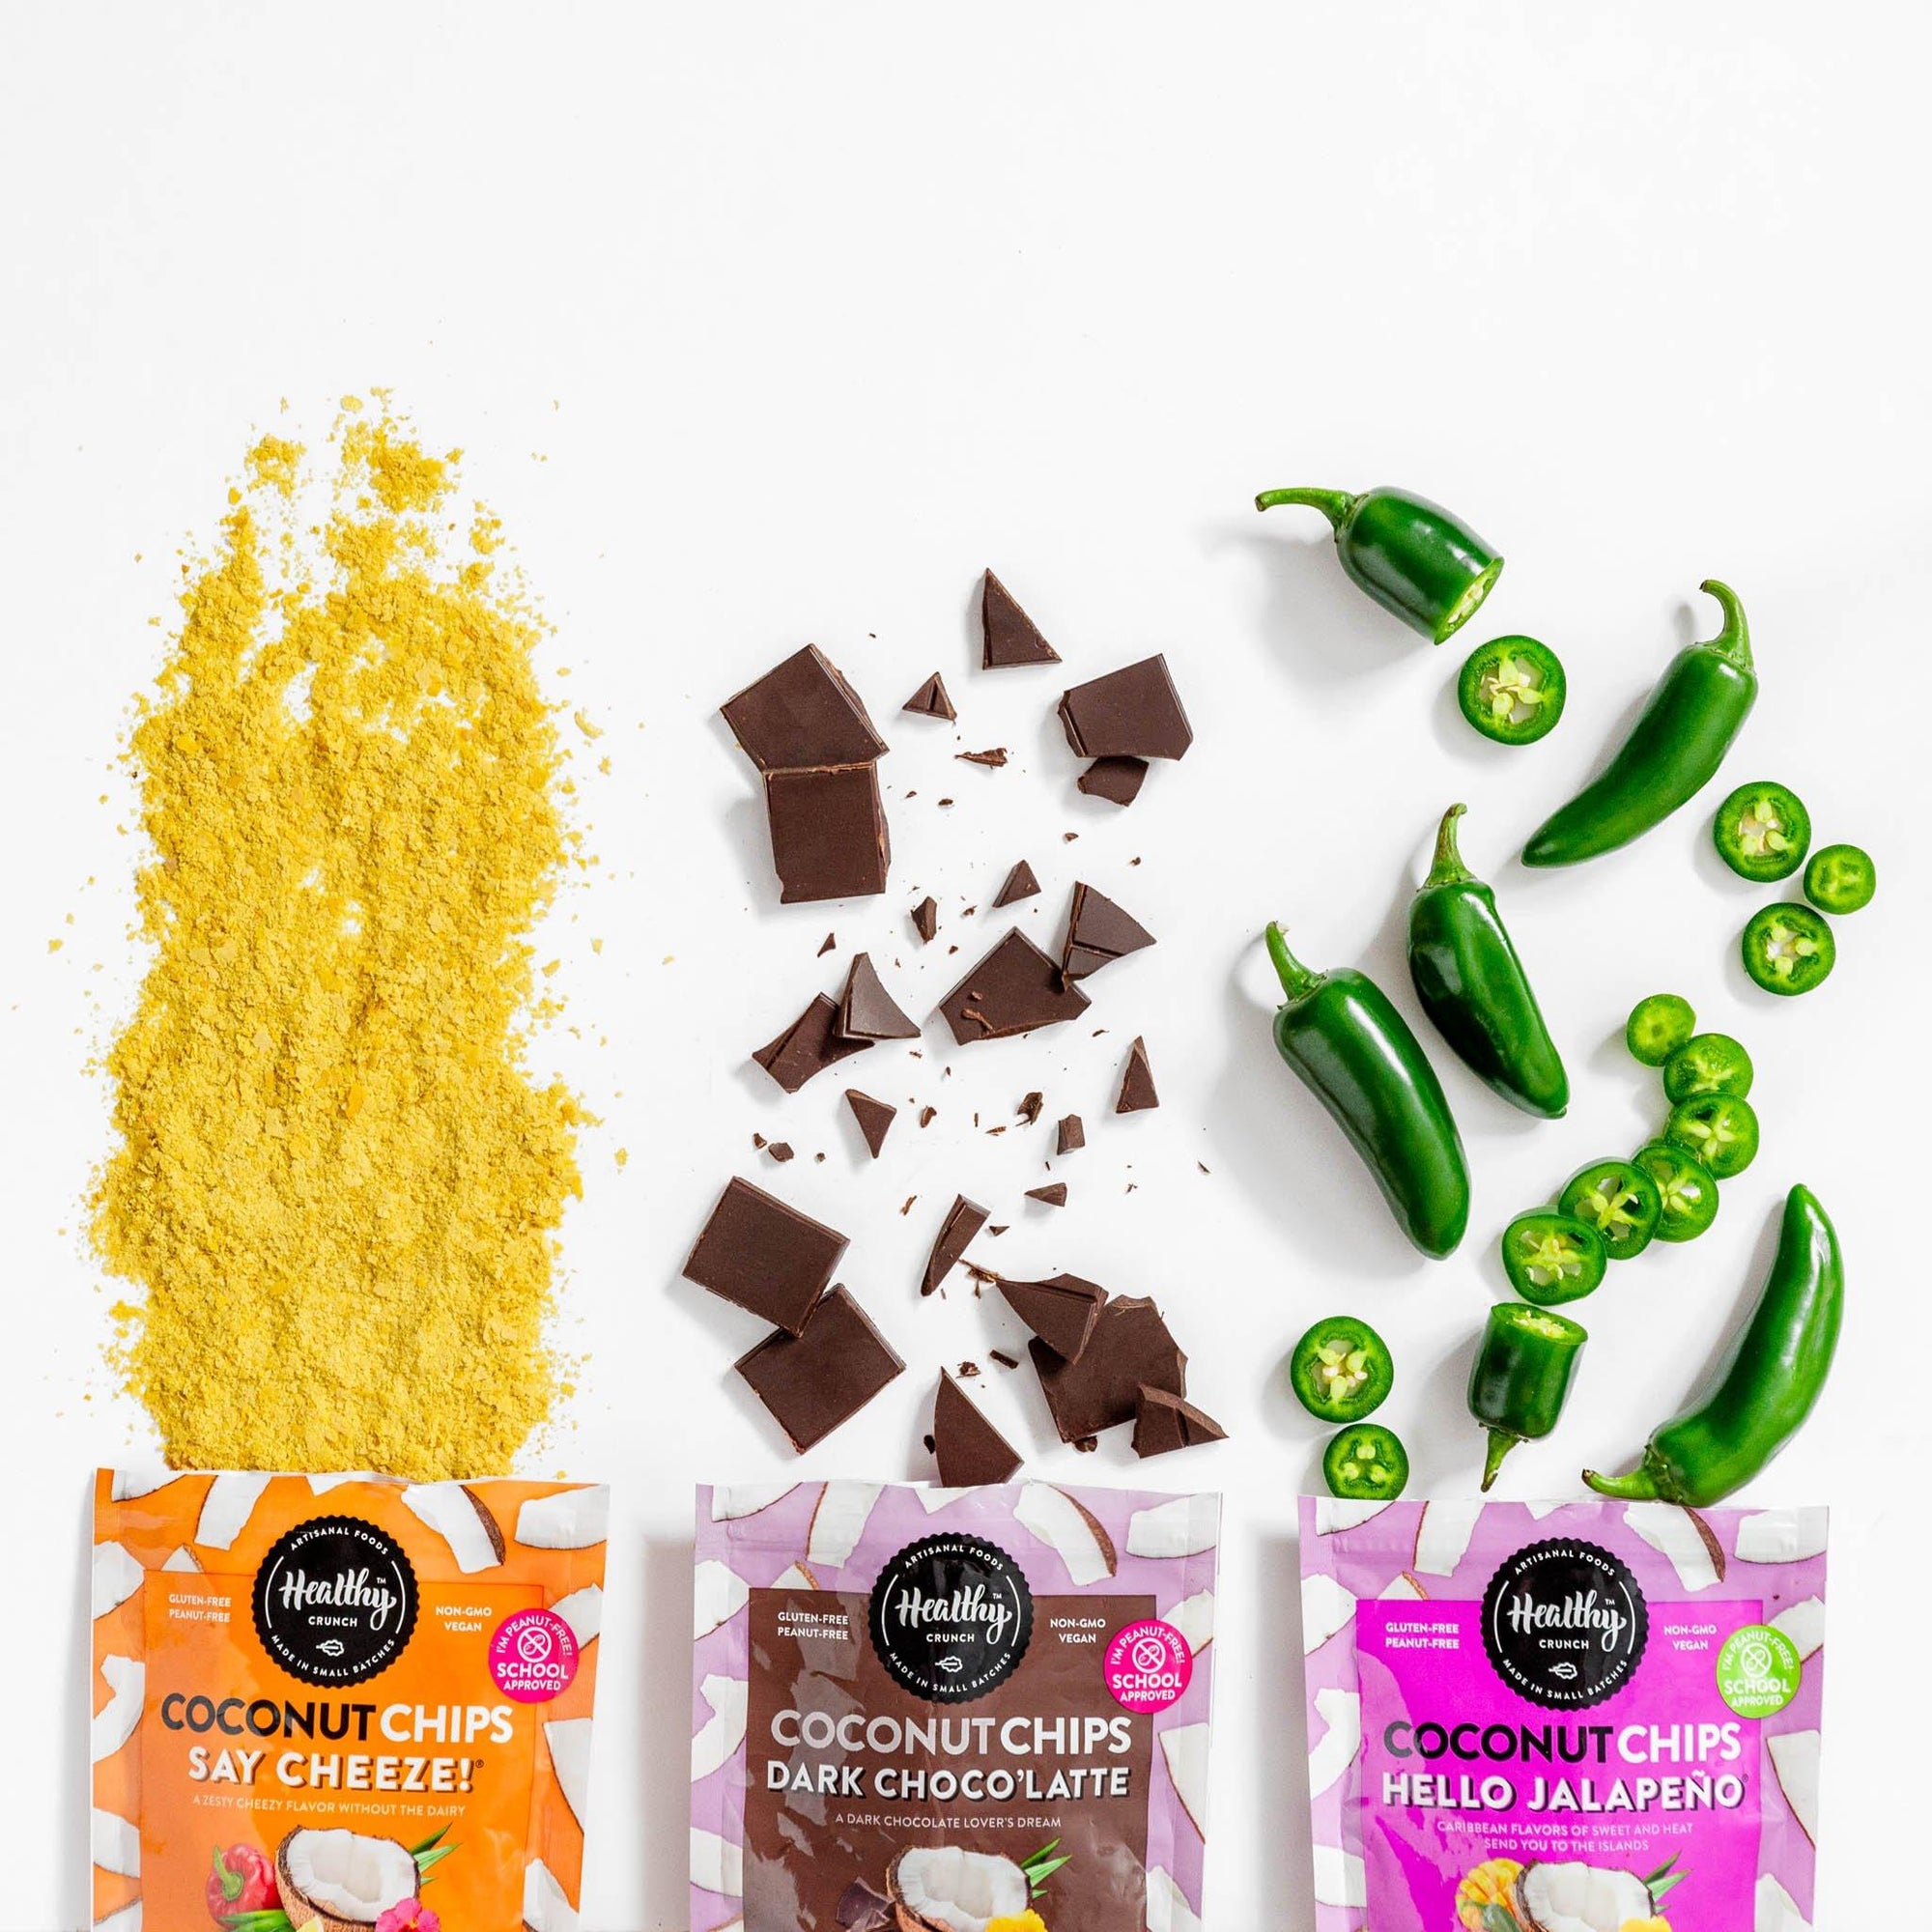 Healthy Crunch partners with PR Firm On Q Communications ahead of Canadian launch